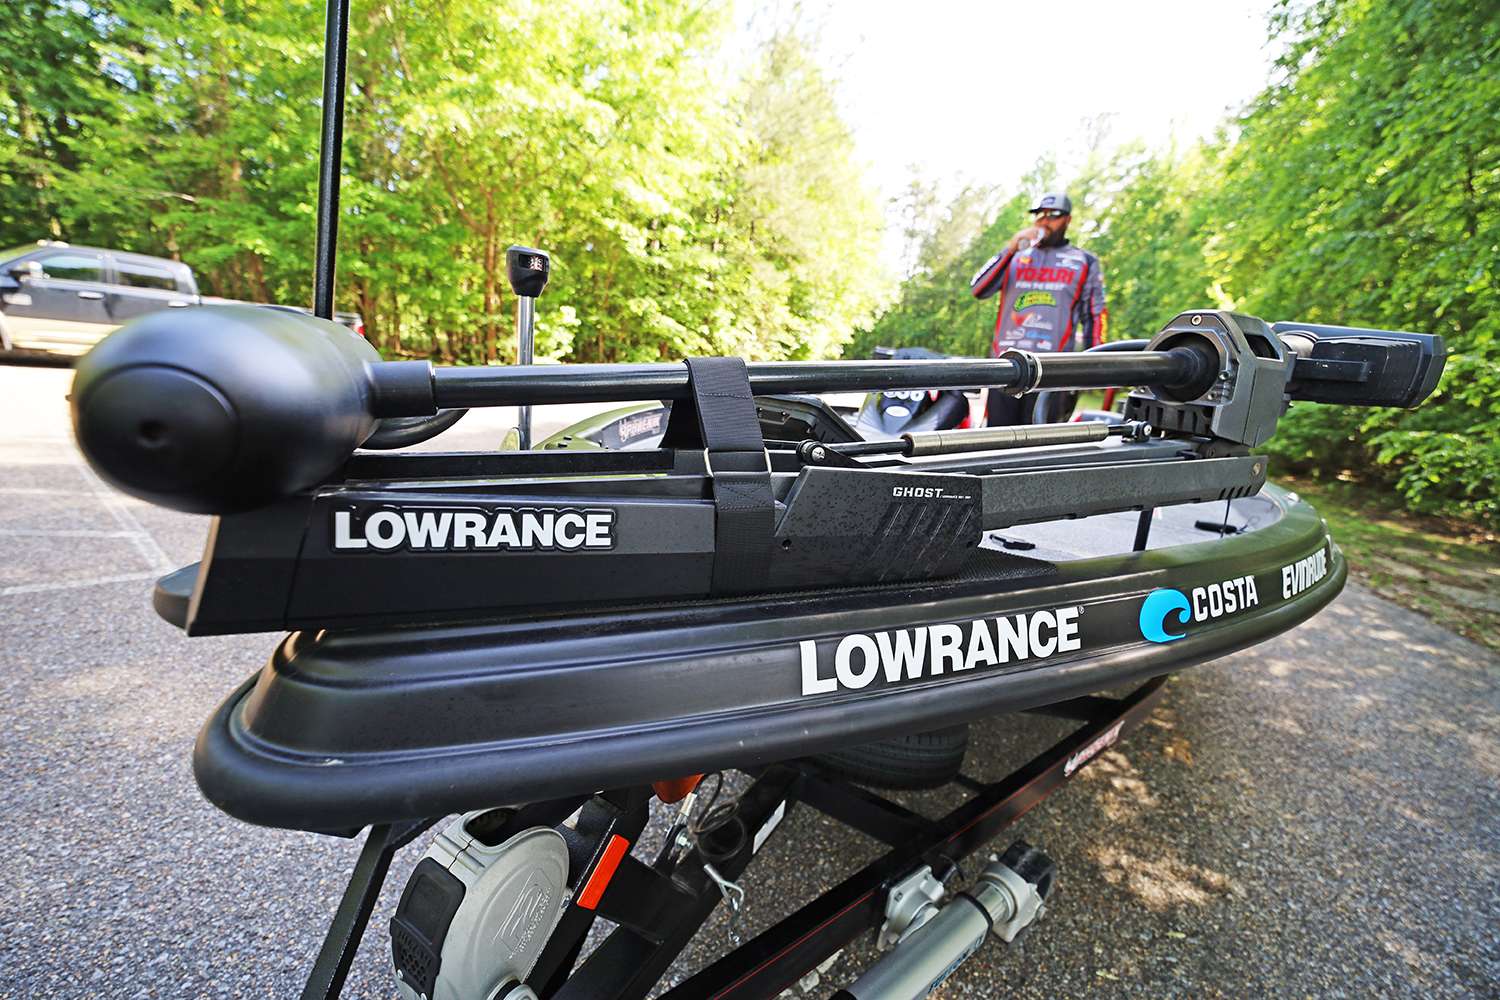 The new Lowrance Ghost trolling motor provides the drive power at the front. 